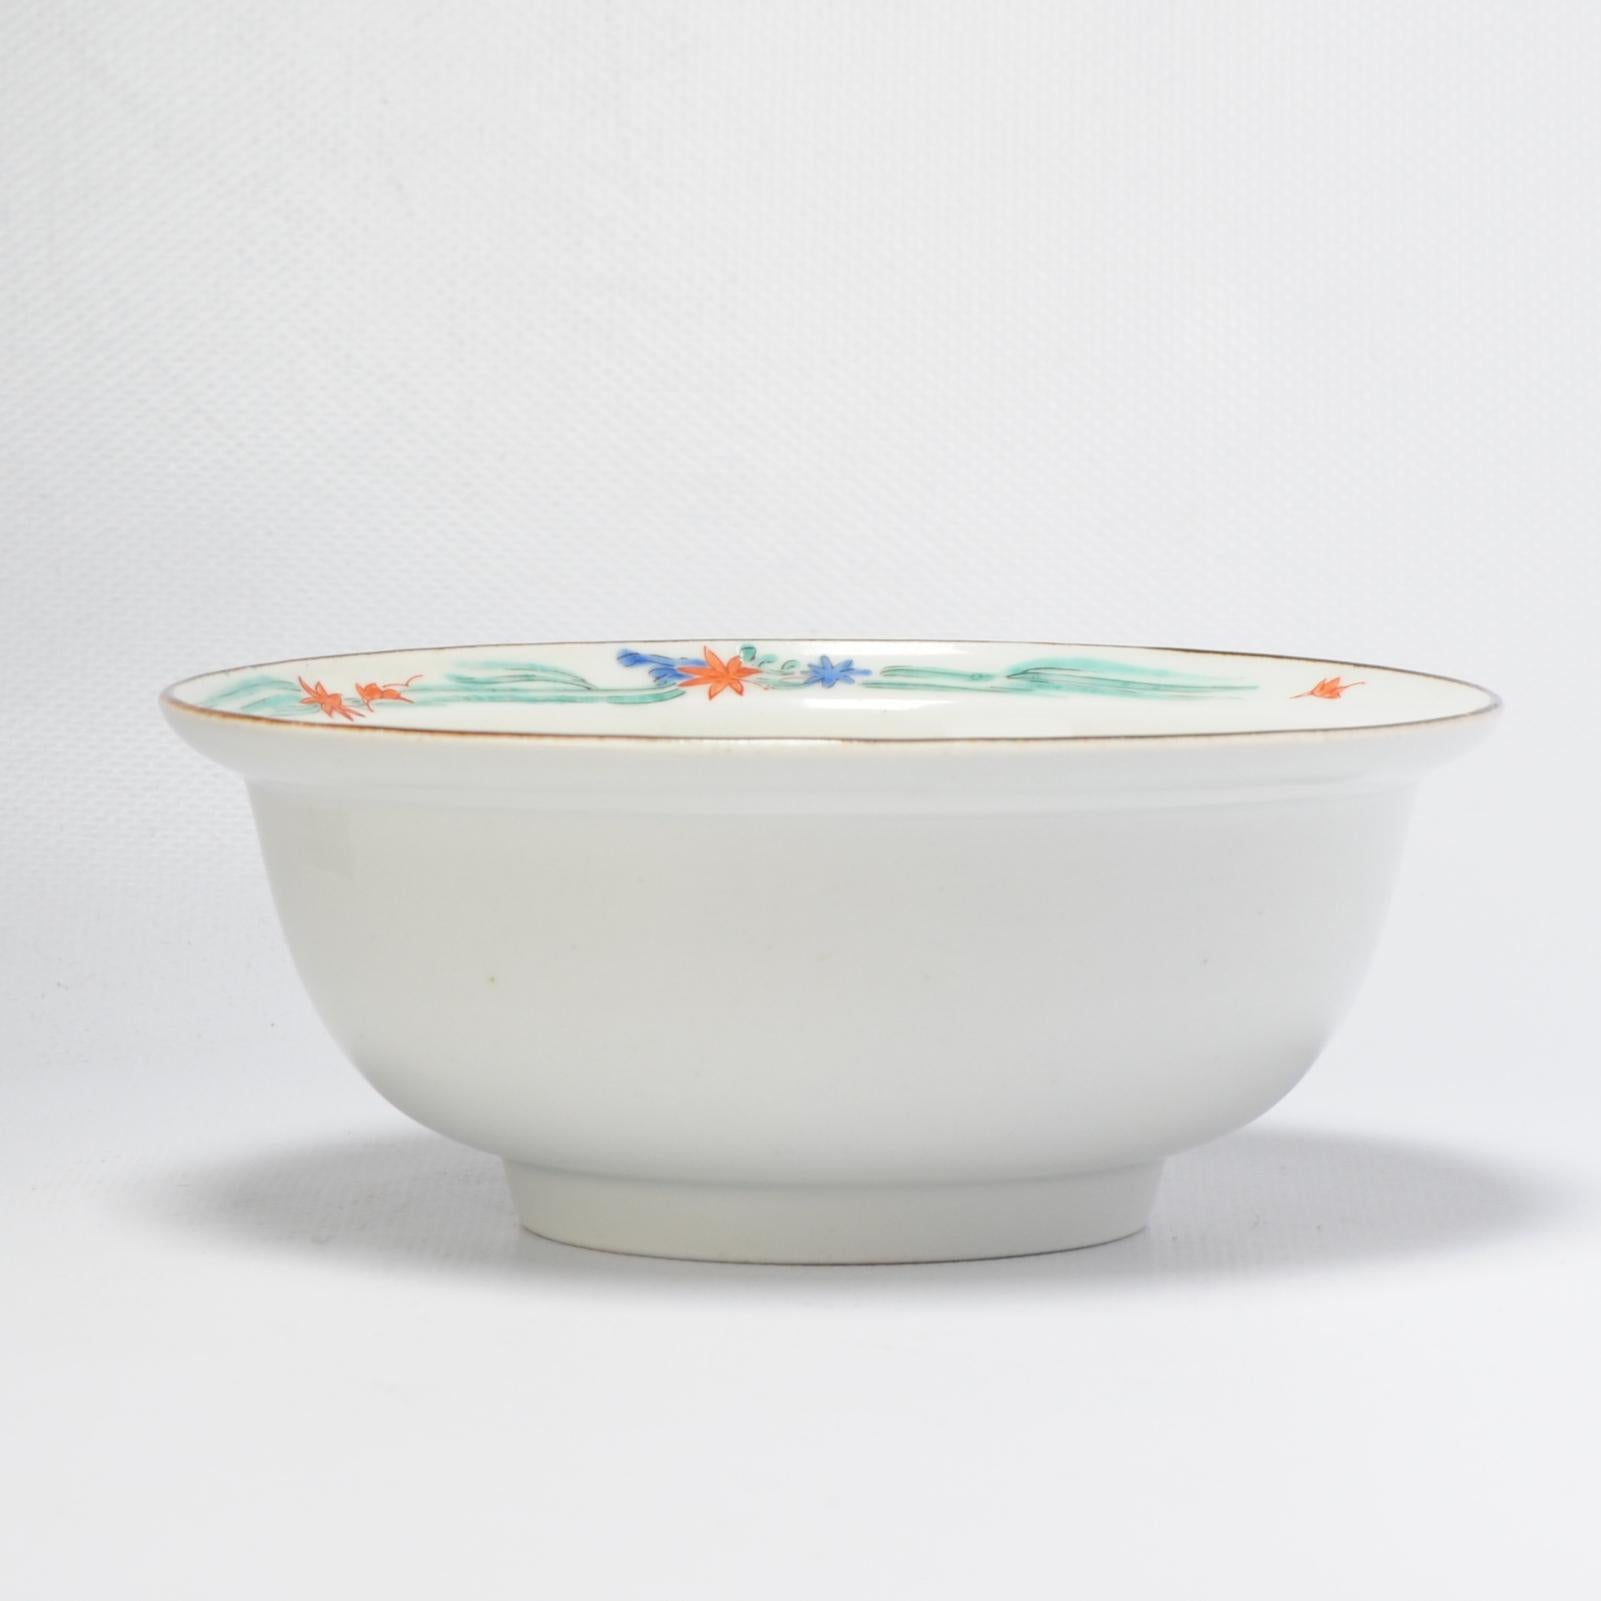 Lovely & High Quality Japanese Porcelain Kakiemon bowl.

The deep sides supported on a short tapering foot, the interior decorated with bamboo and flowers. The everted rim with a floral scenes.

Additional information:
Material: Porcelain &